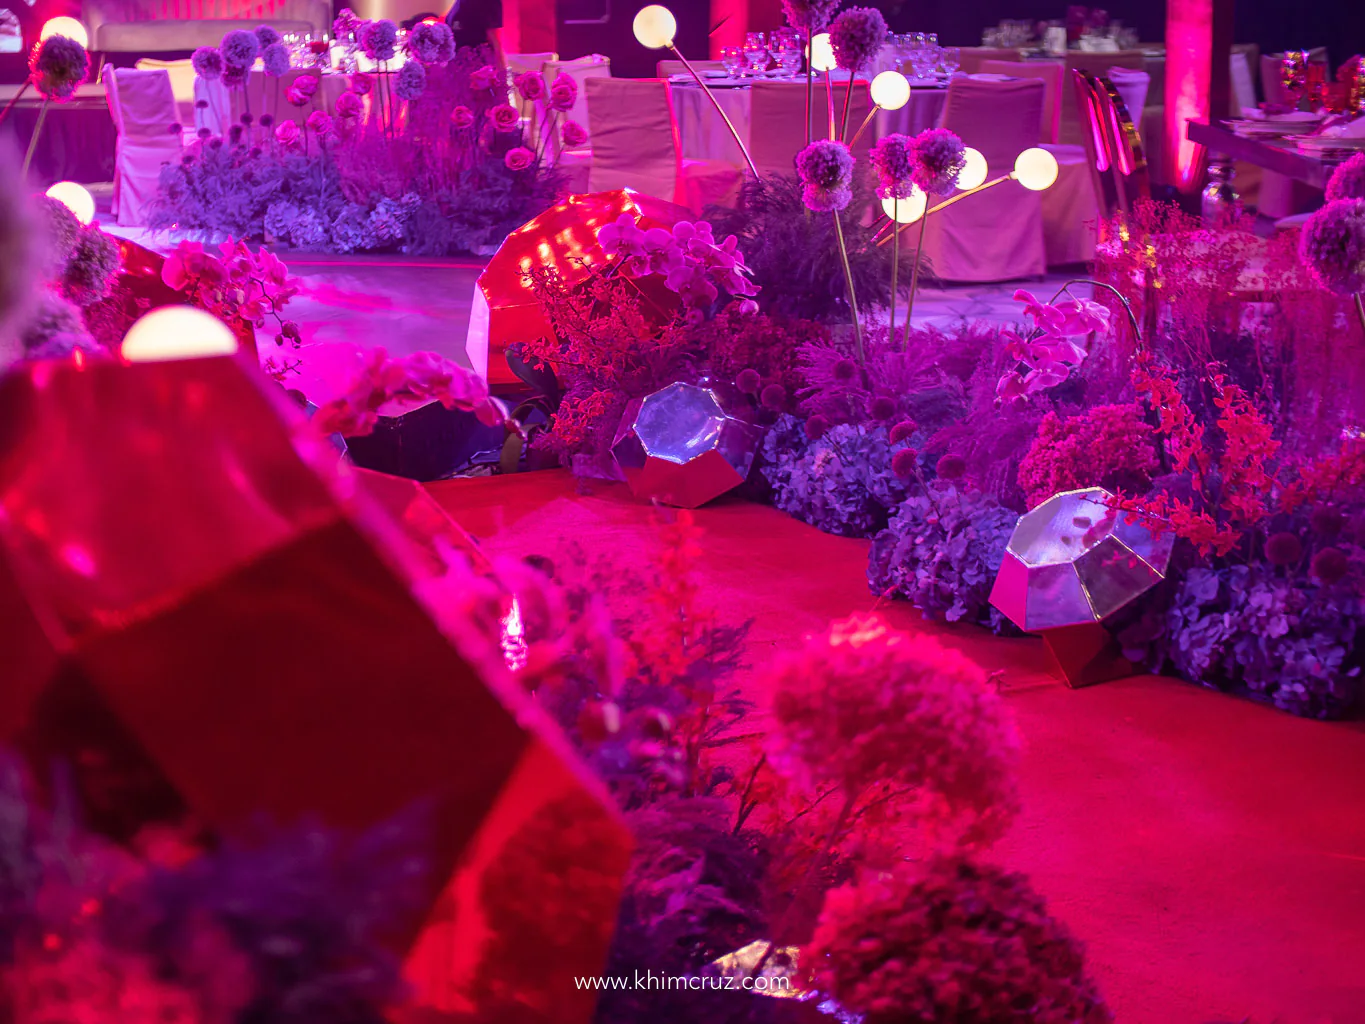 diamonds and rubies themed jewel-toned floral pathway with 3D gem props